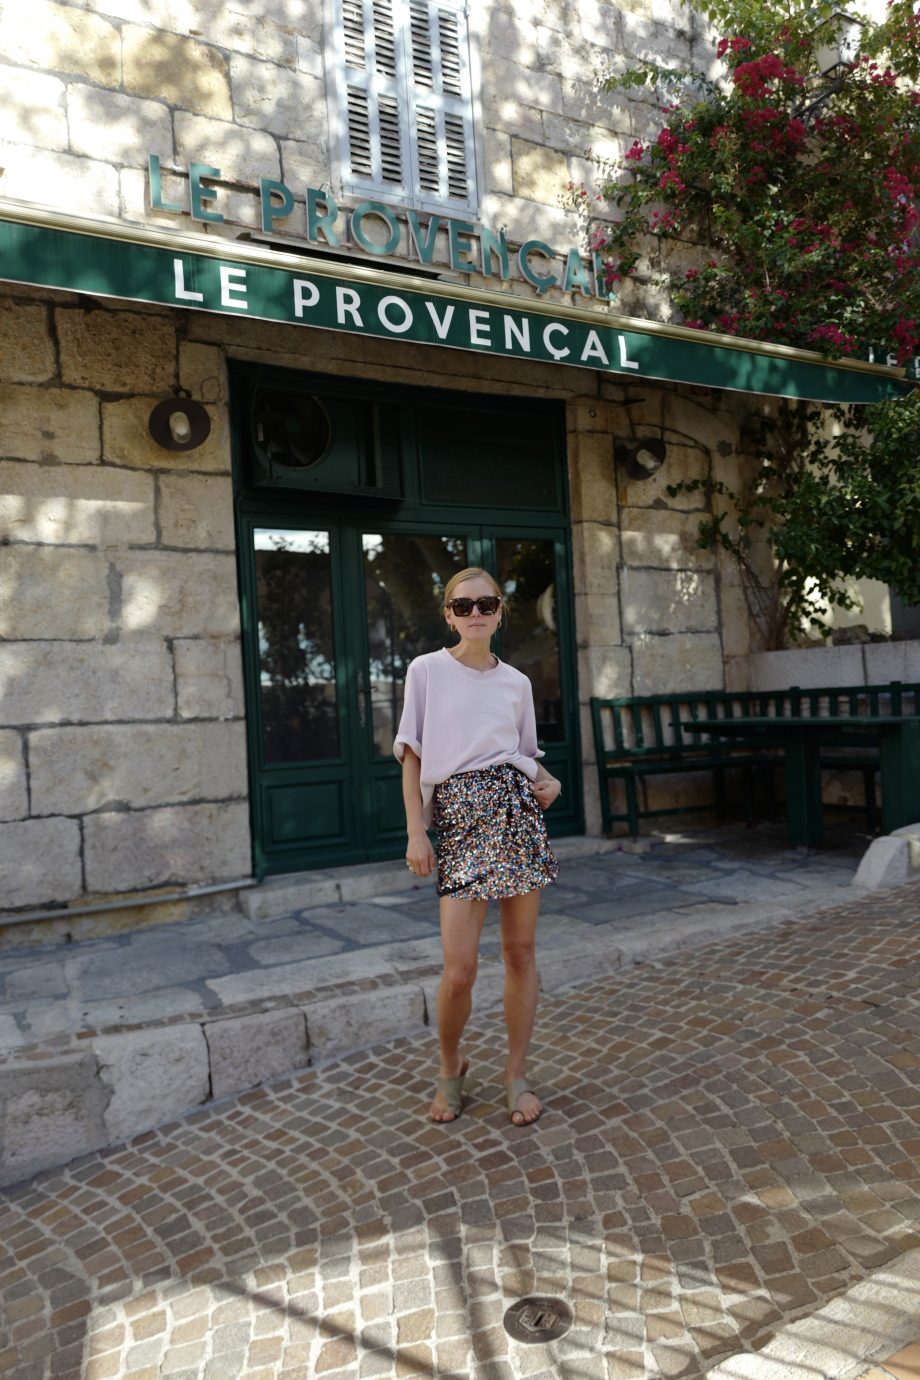 The beauty of Provence